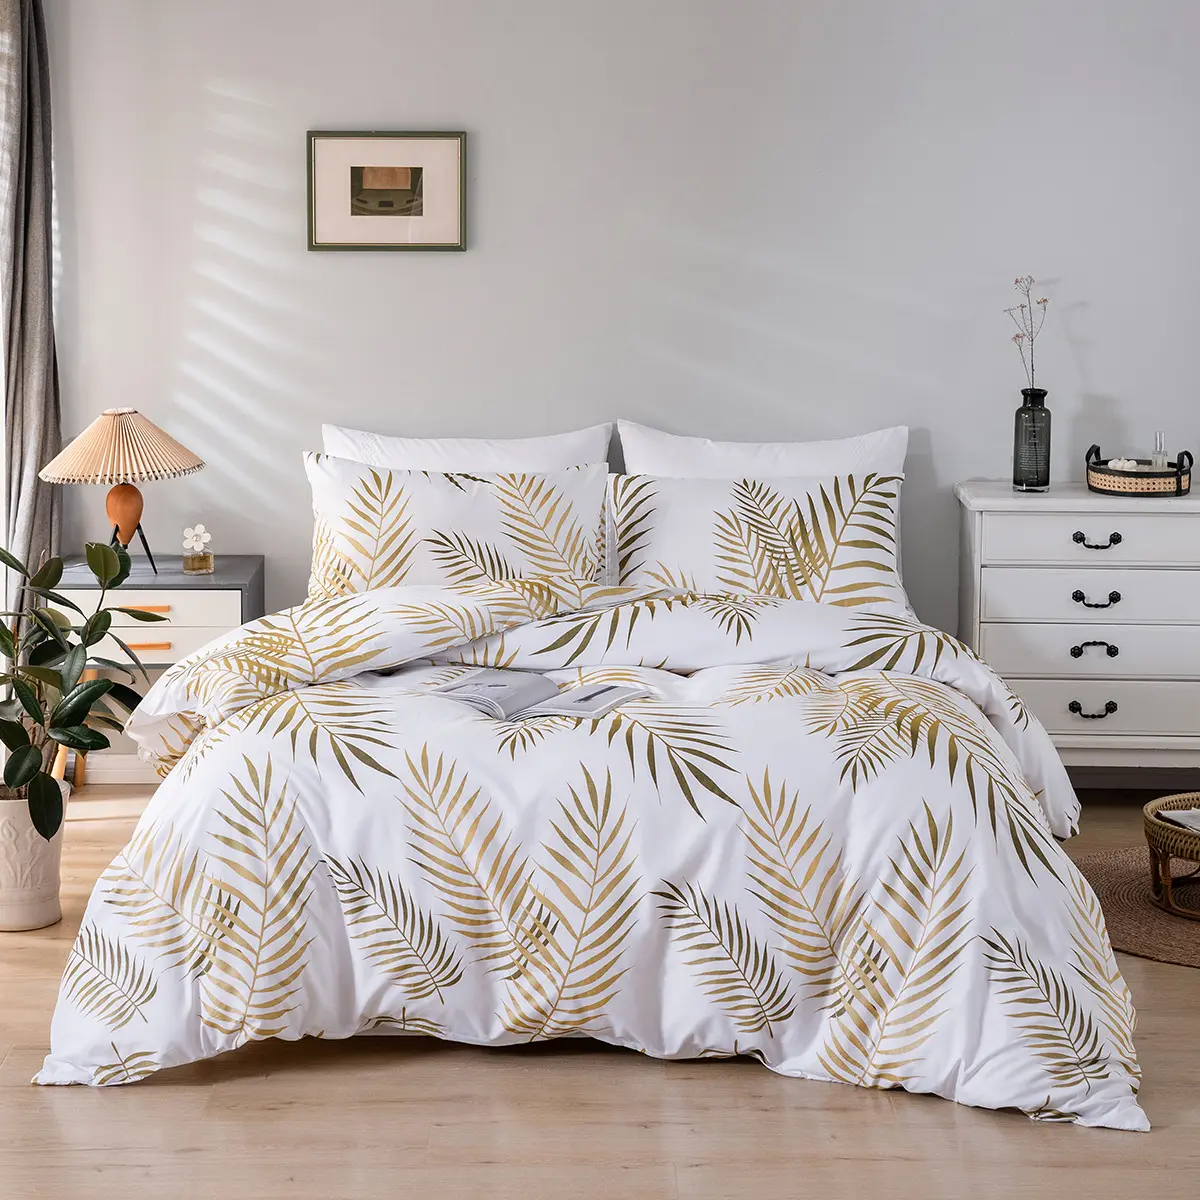 High Quality Printed 3 Pieces Bed Cover Duvet Bedding King Size Duvet Cover Set